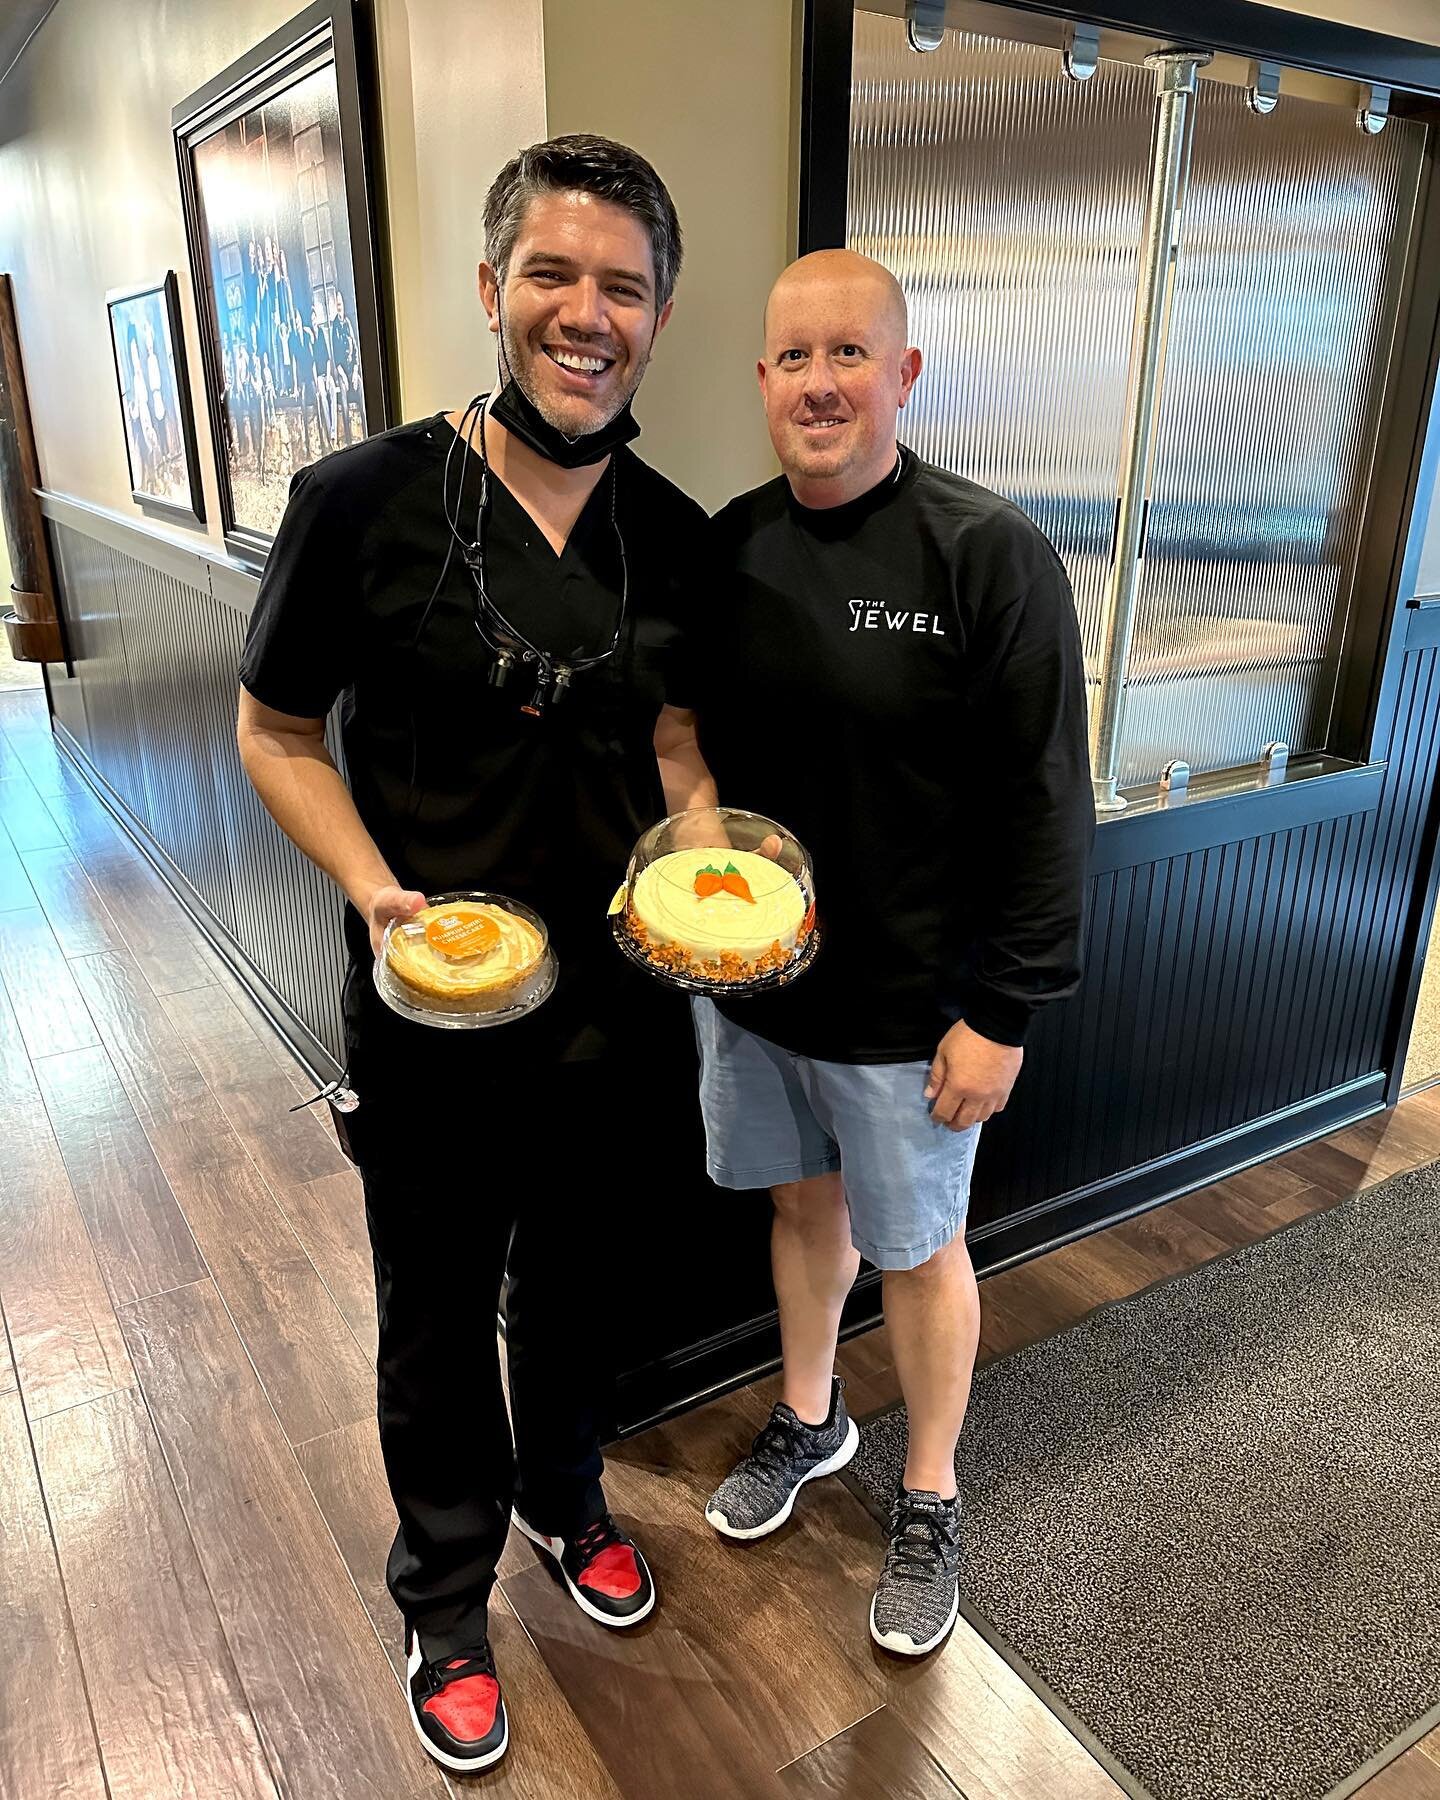 True story &hellip; we forgot to socially celebrate Dr. Mitts&rsquo; birthday 😬🤫 Thankfully, Michael brought us his favorite treat! A whole pumpkin cheesecake so we can celebrate him again! 🥧  Dr. Mitts, we love you and are so honored you get to s